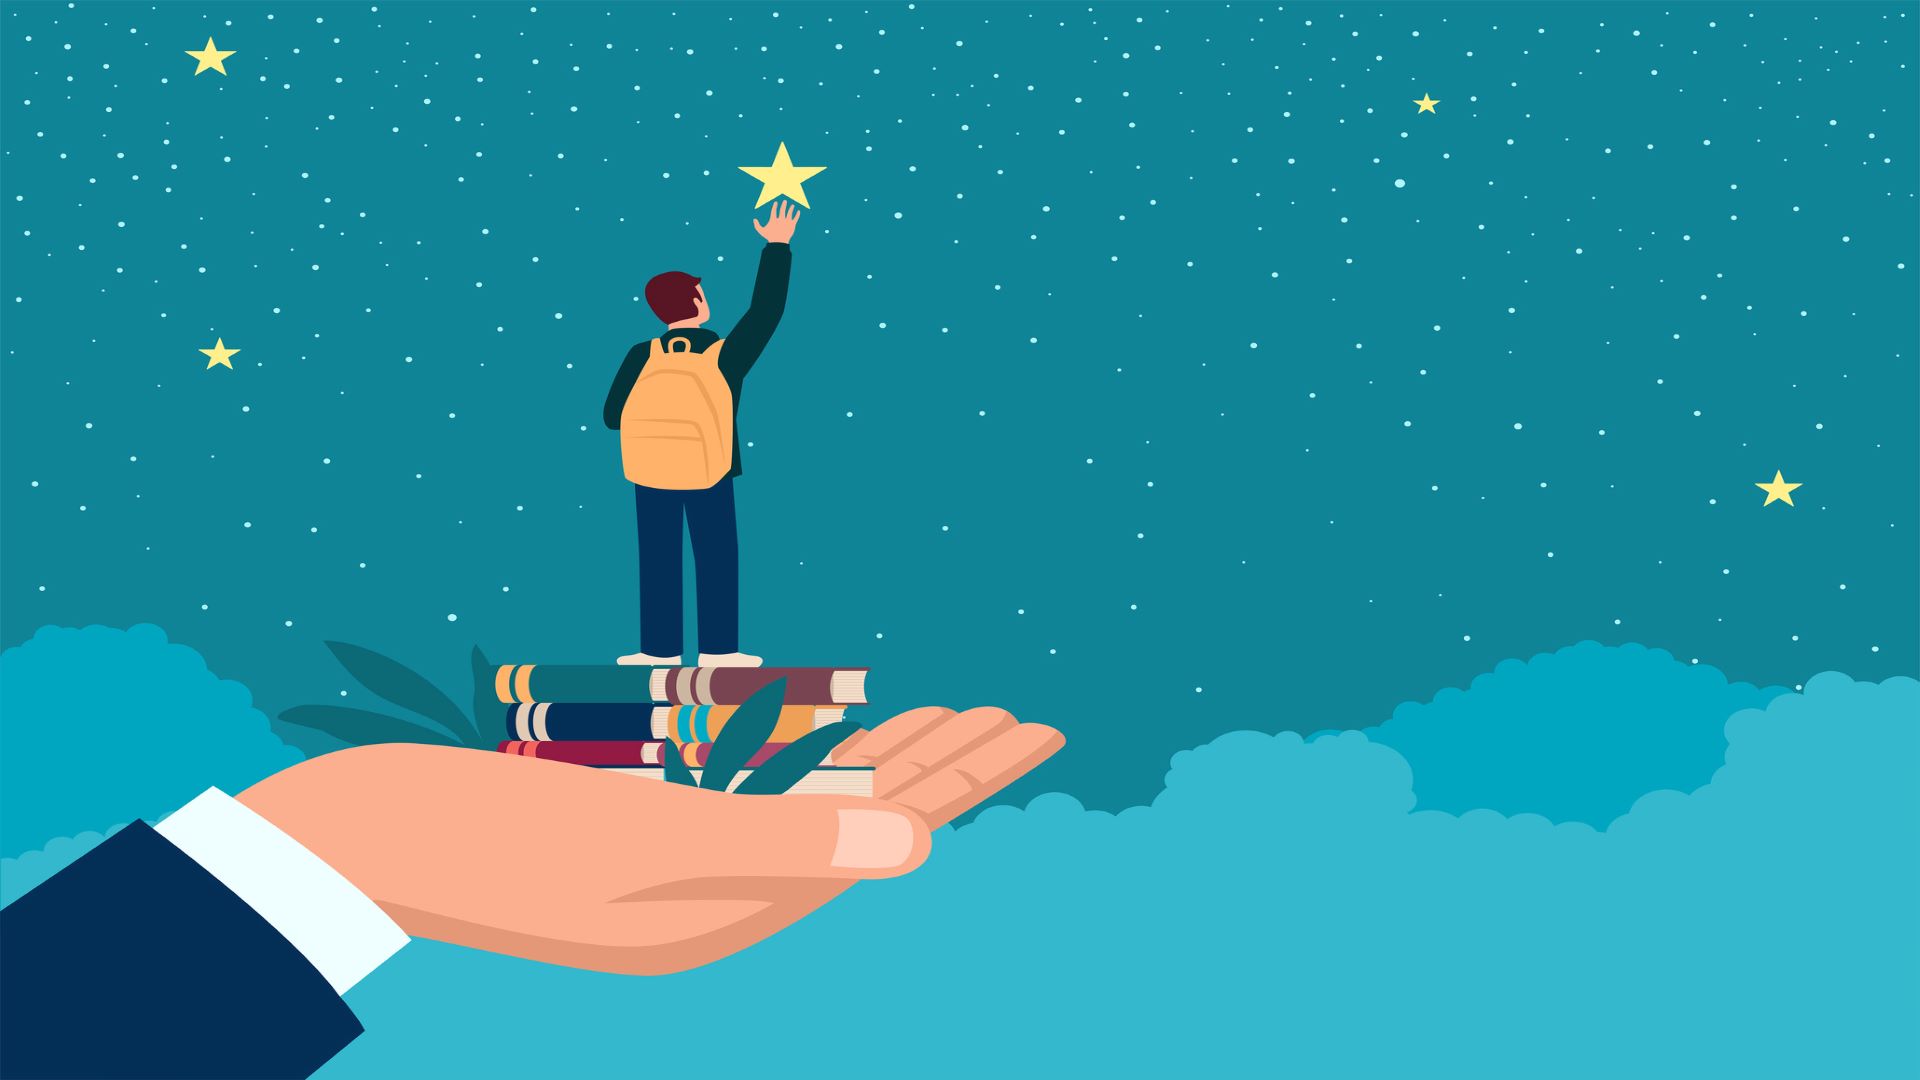 unmotivated student: concept illustration of a student standing on his teacher's palm and reaching for the stars.